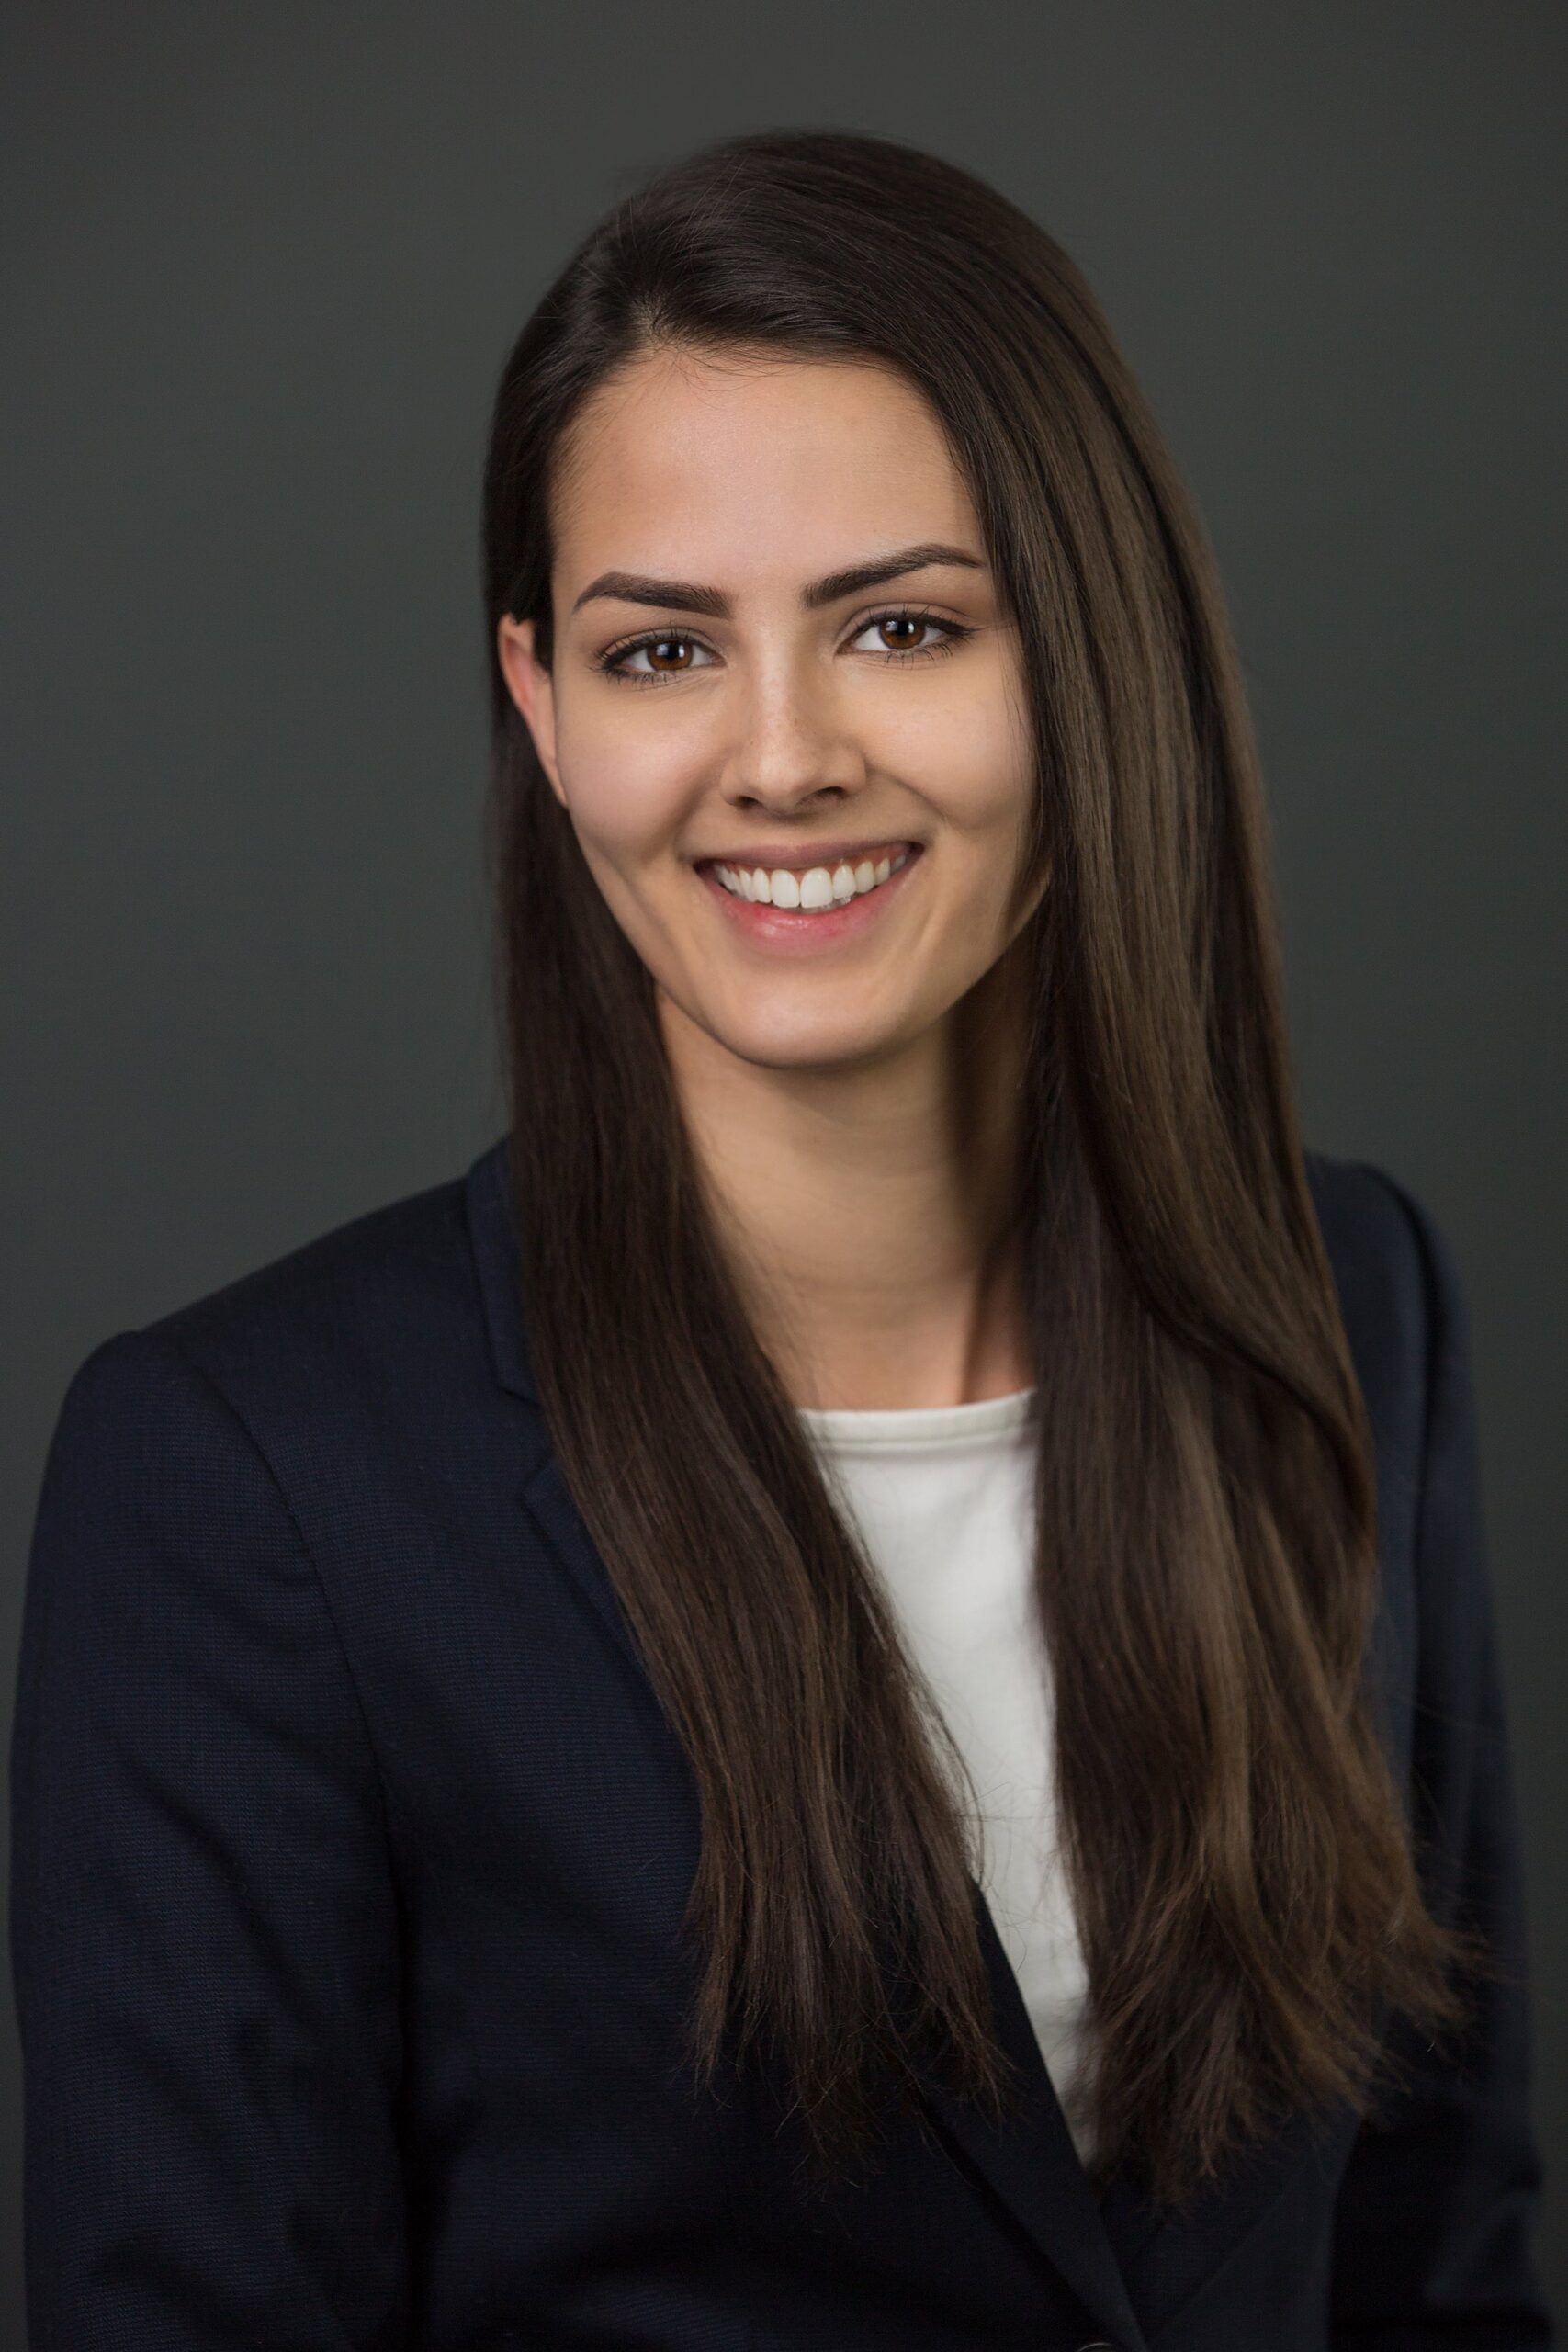 The Whittier Trust Company of Nevada, individuals and foundations across the United States, has added Hannah Gangar to its team as an Investment Associate.